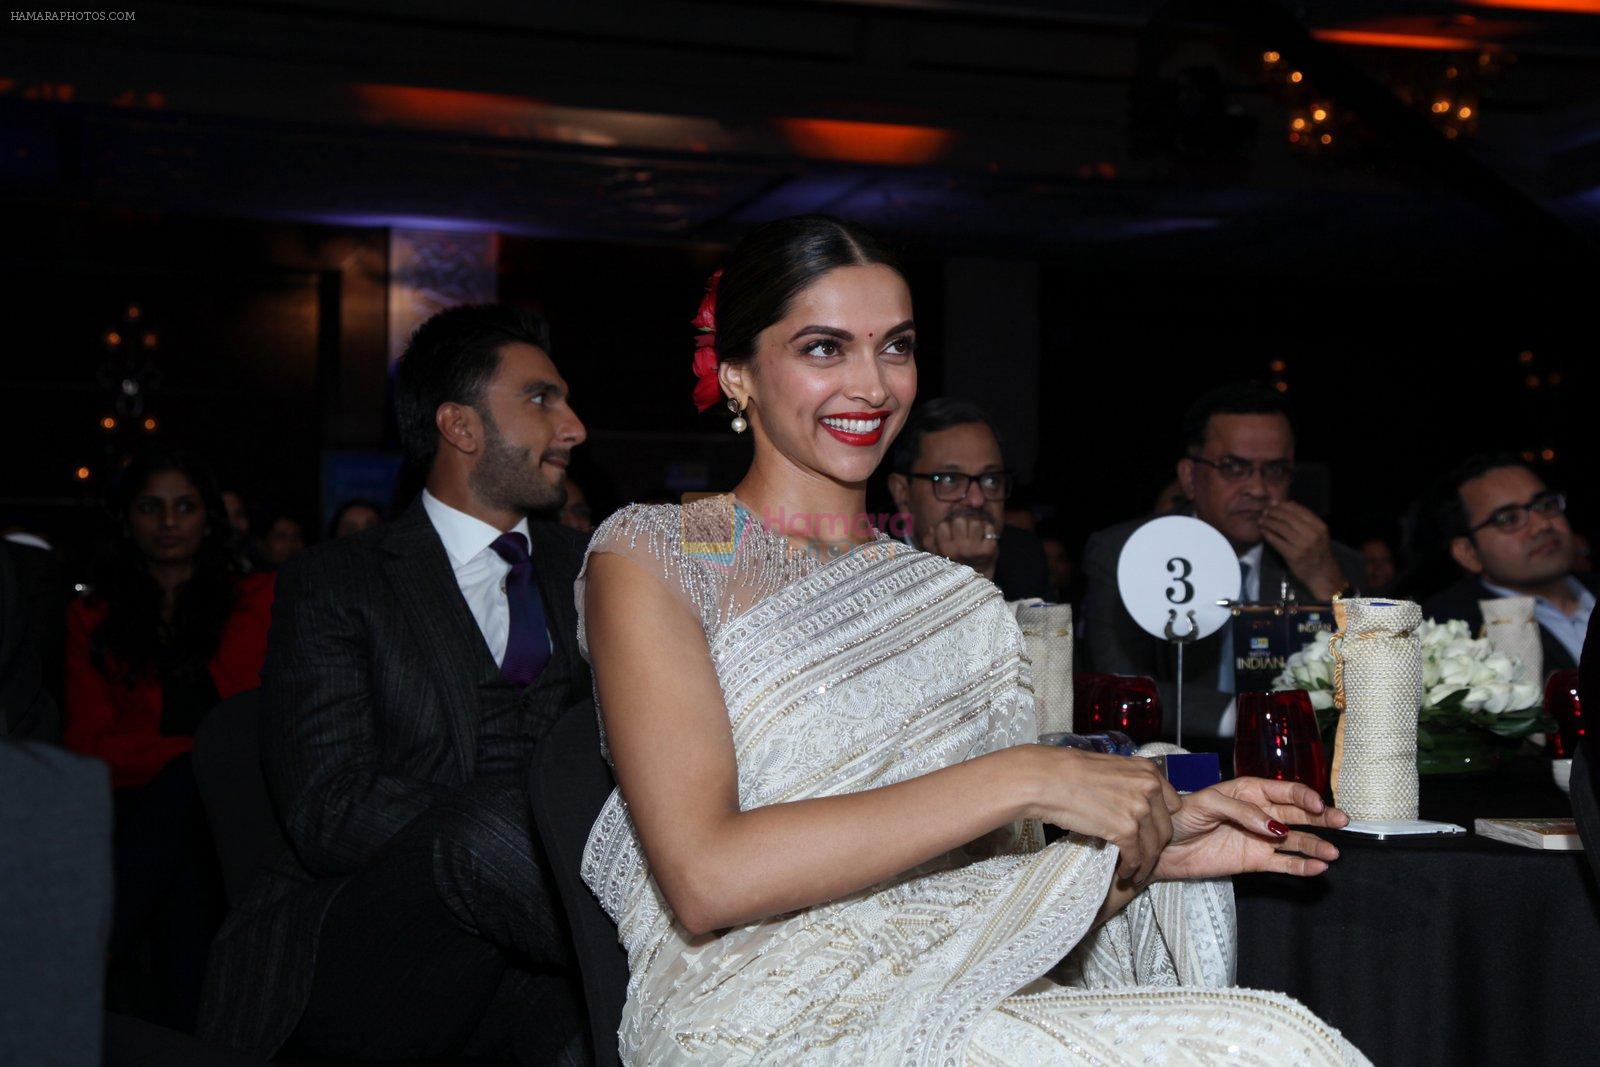 Deepika Padukone at NDTV Indian of the year on 5th Feb 2016